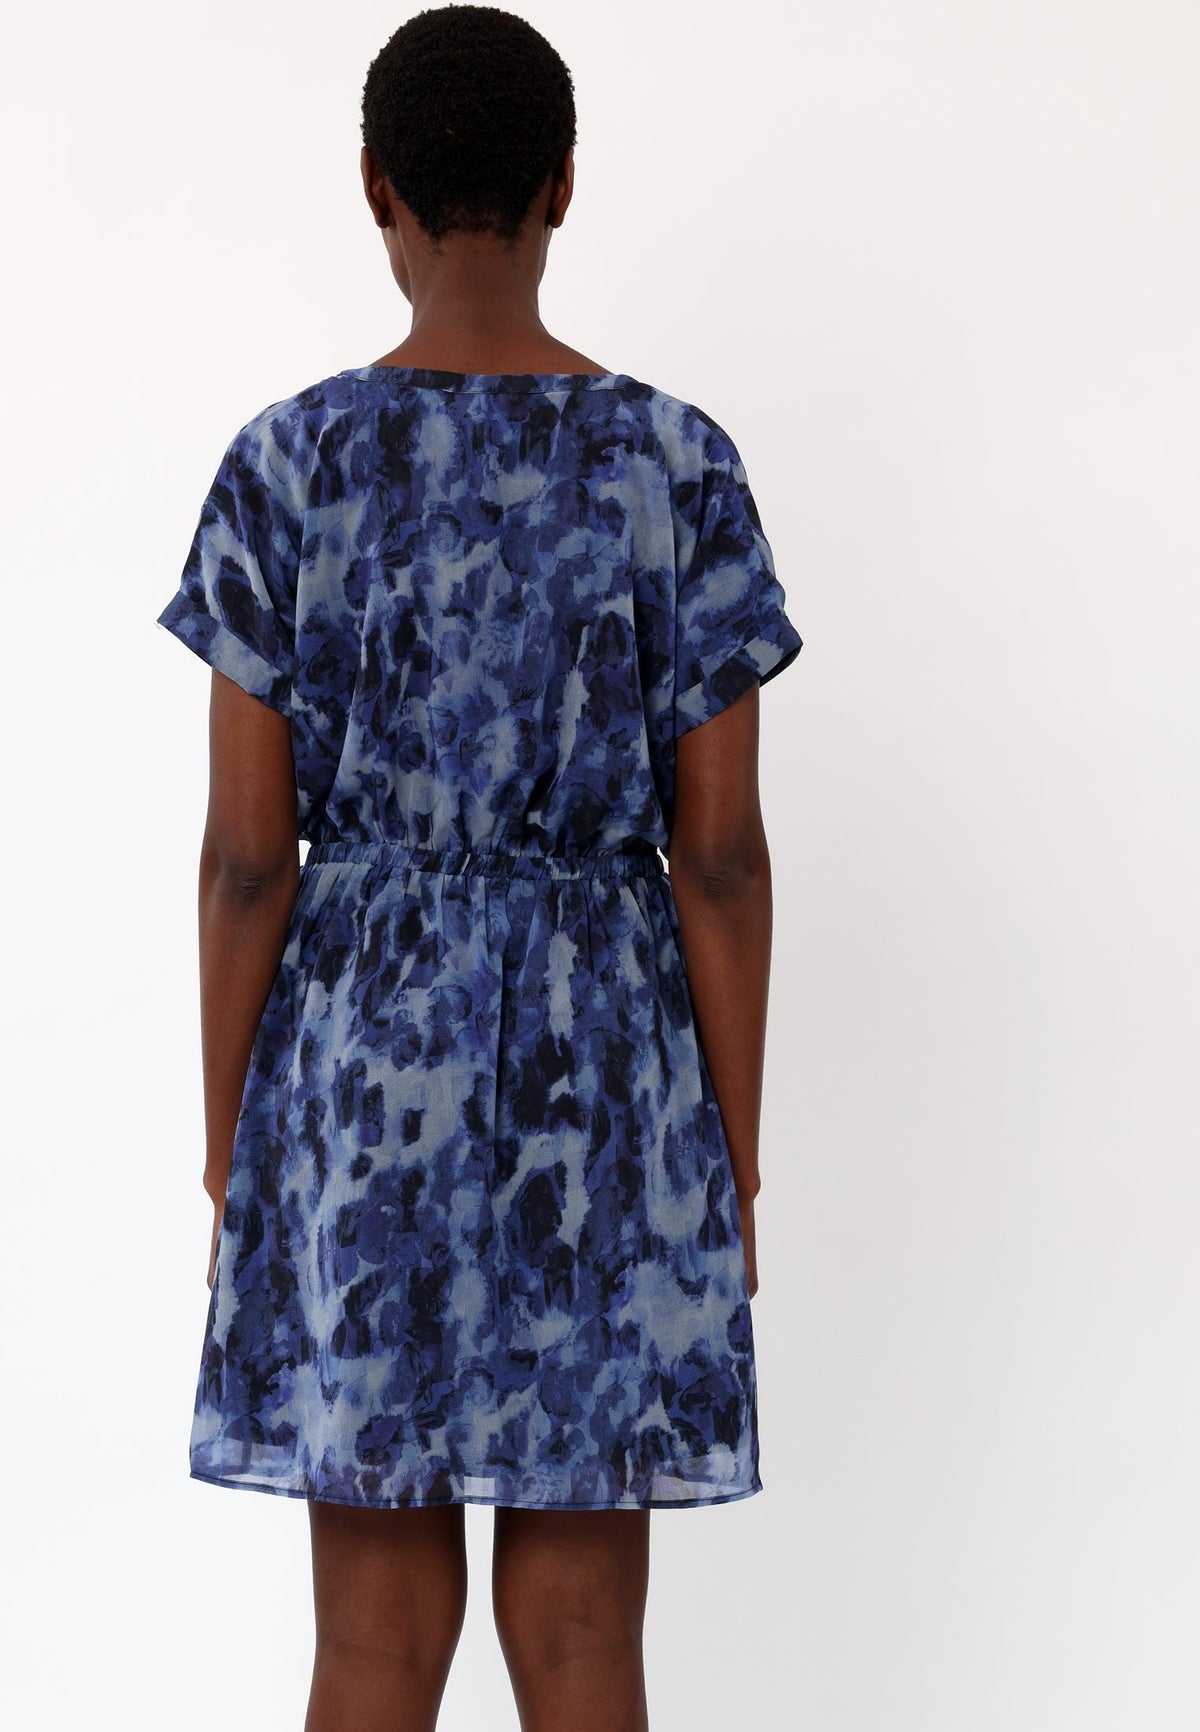 AMBER DRESS COVER NAVY